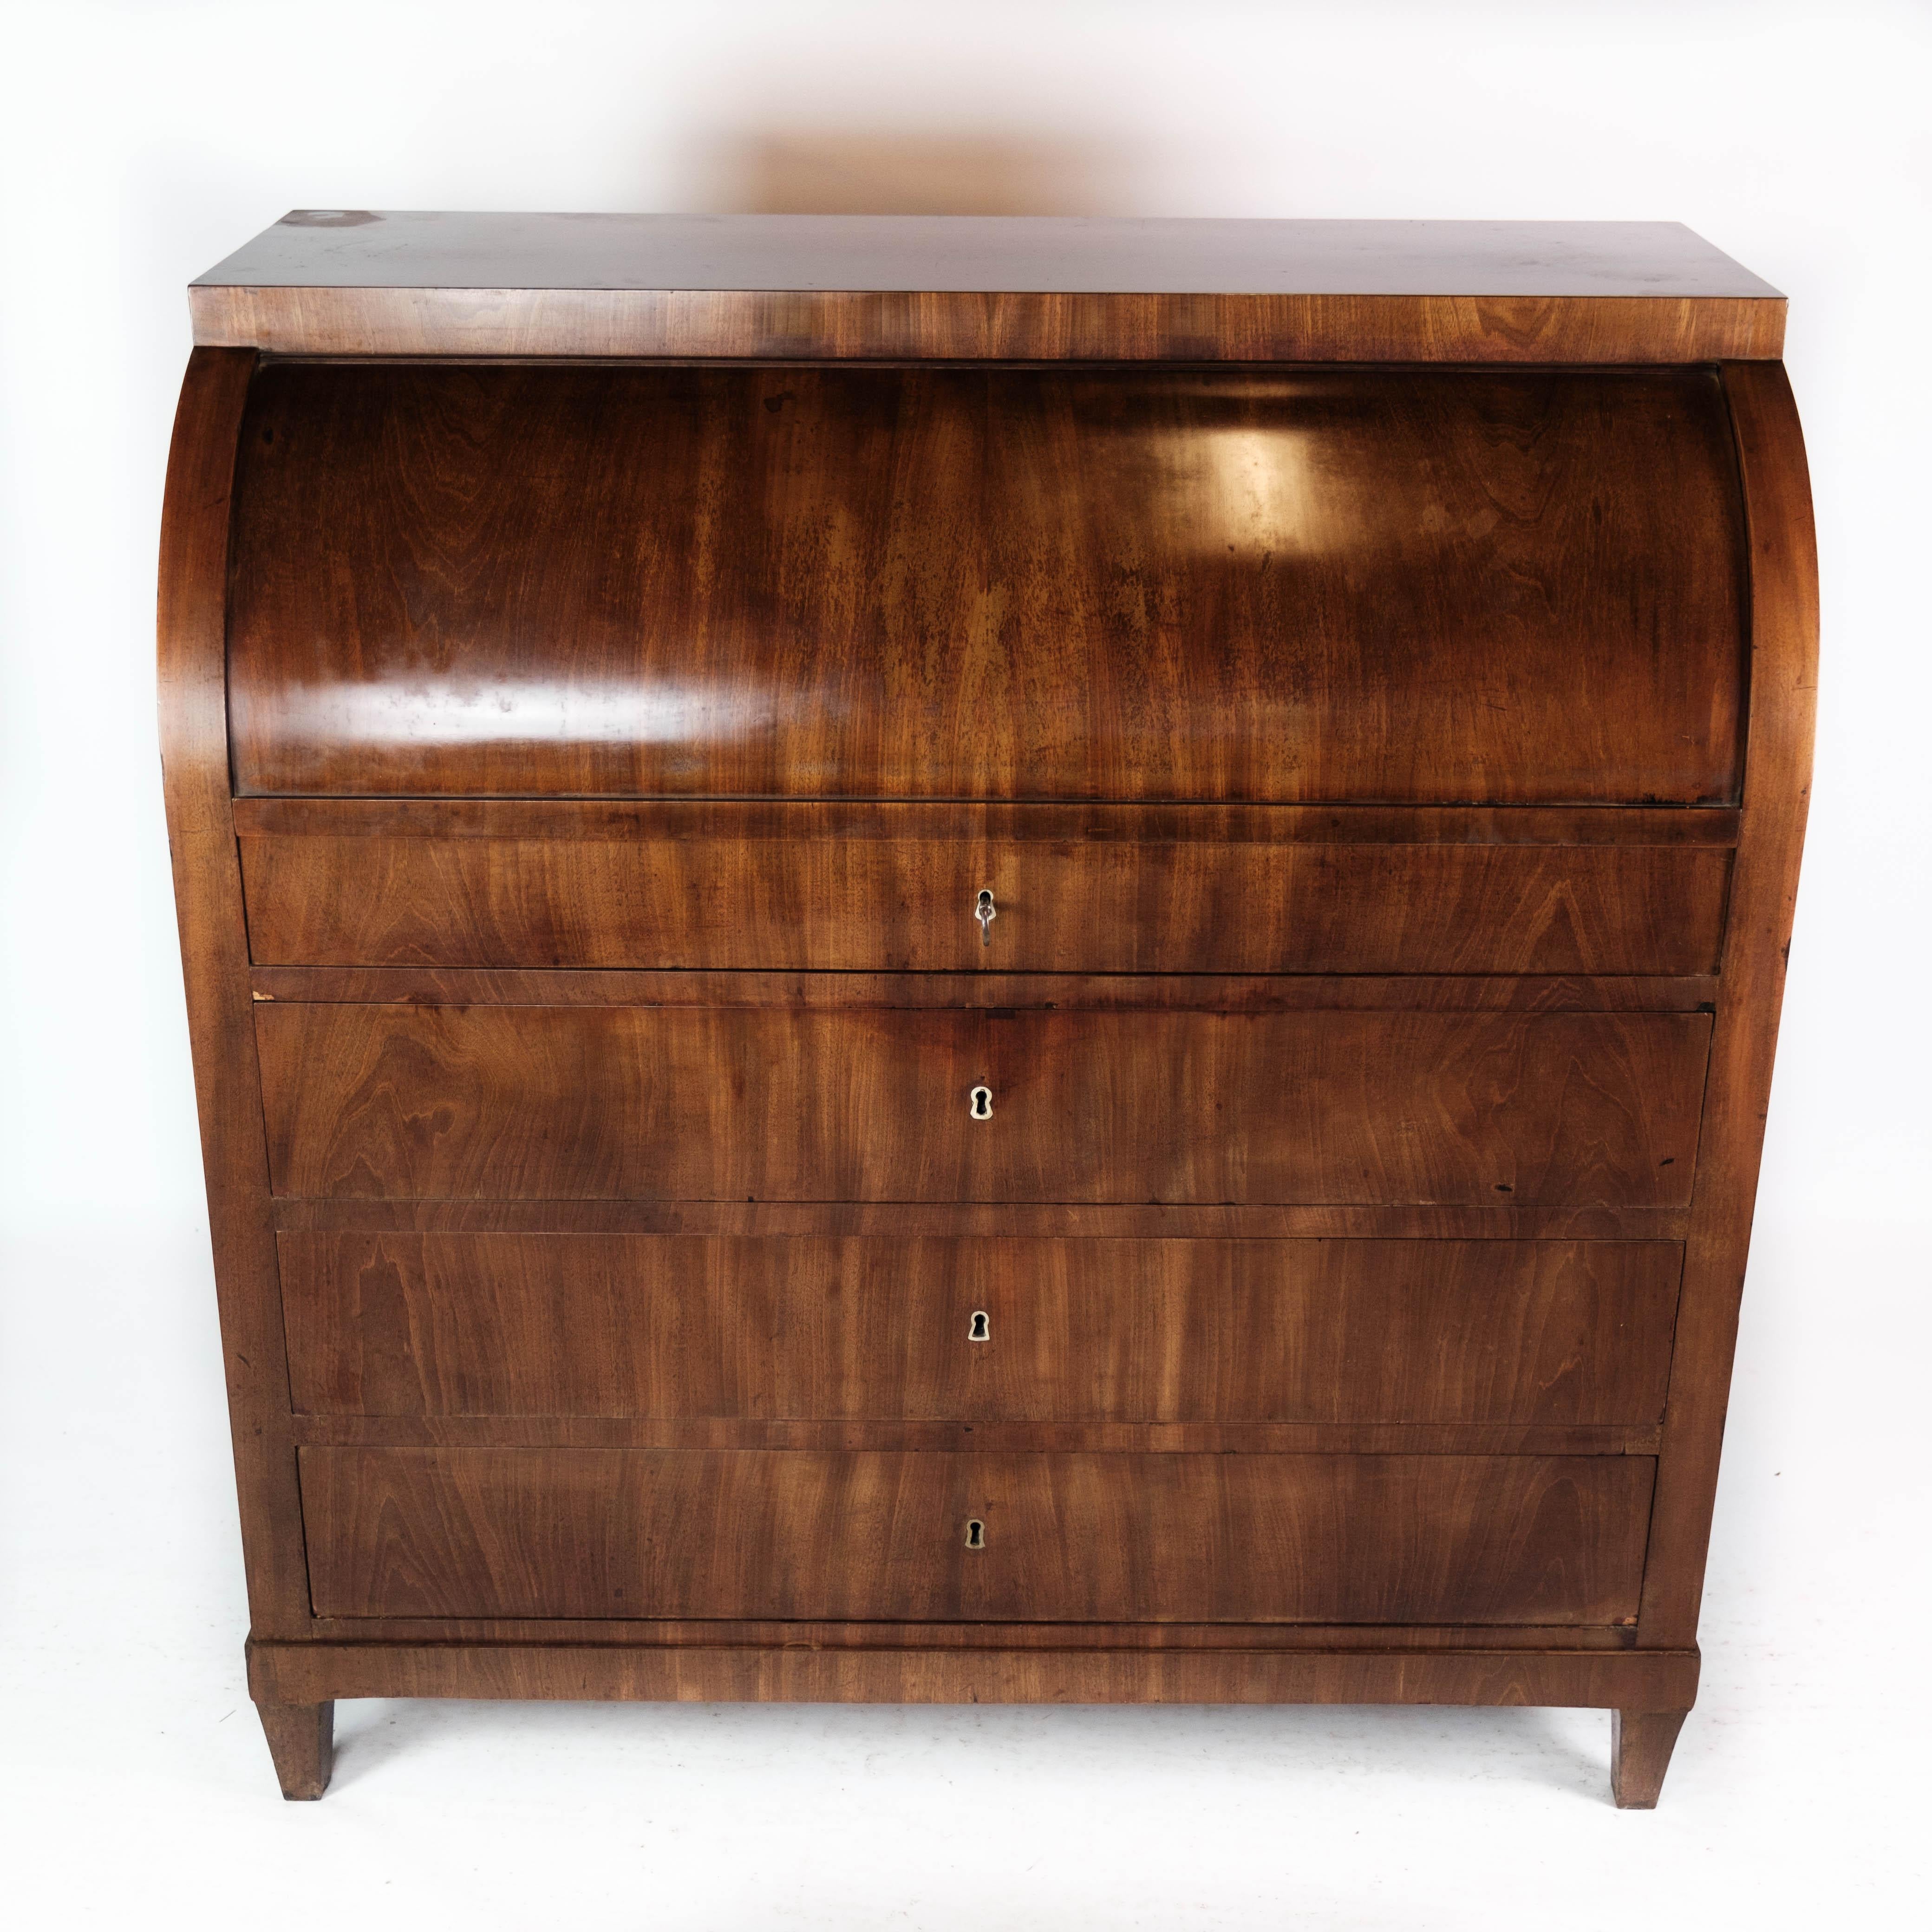 Empire bureau of mahogany with inlaid wood, in great antique condition from the 1840s.